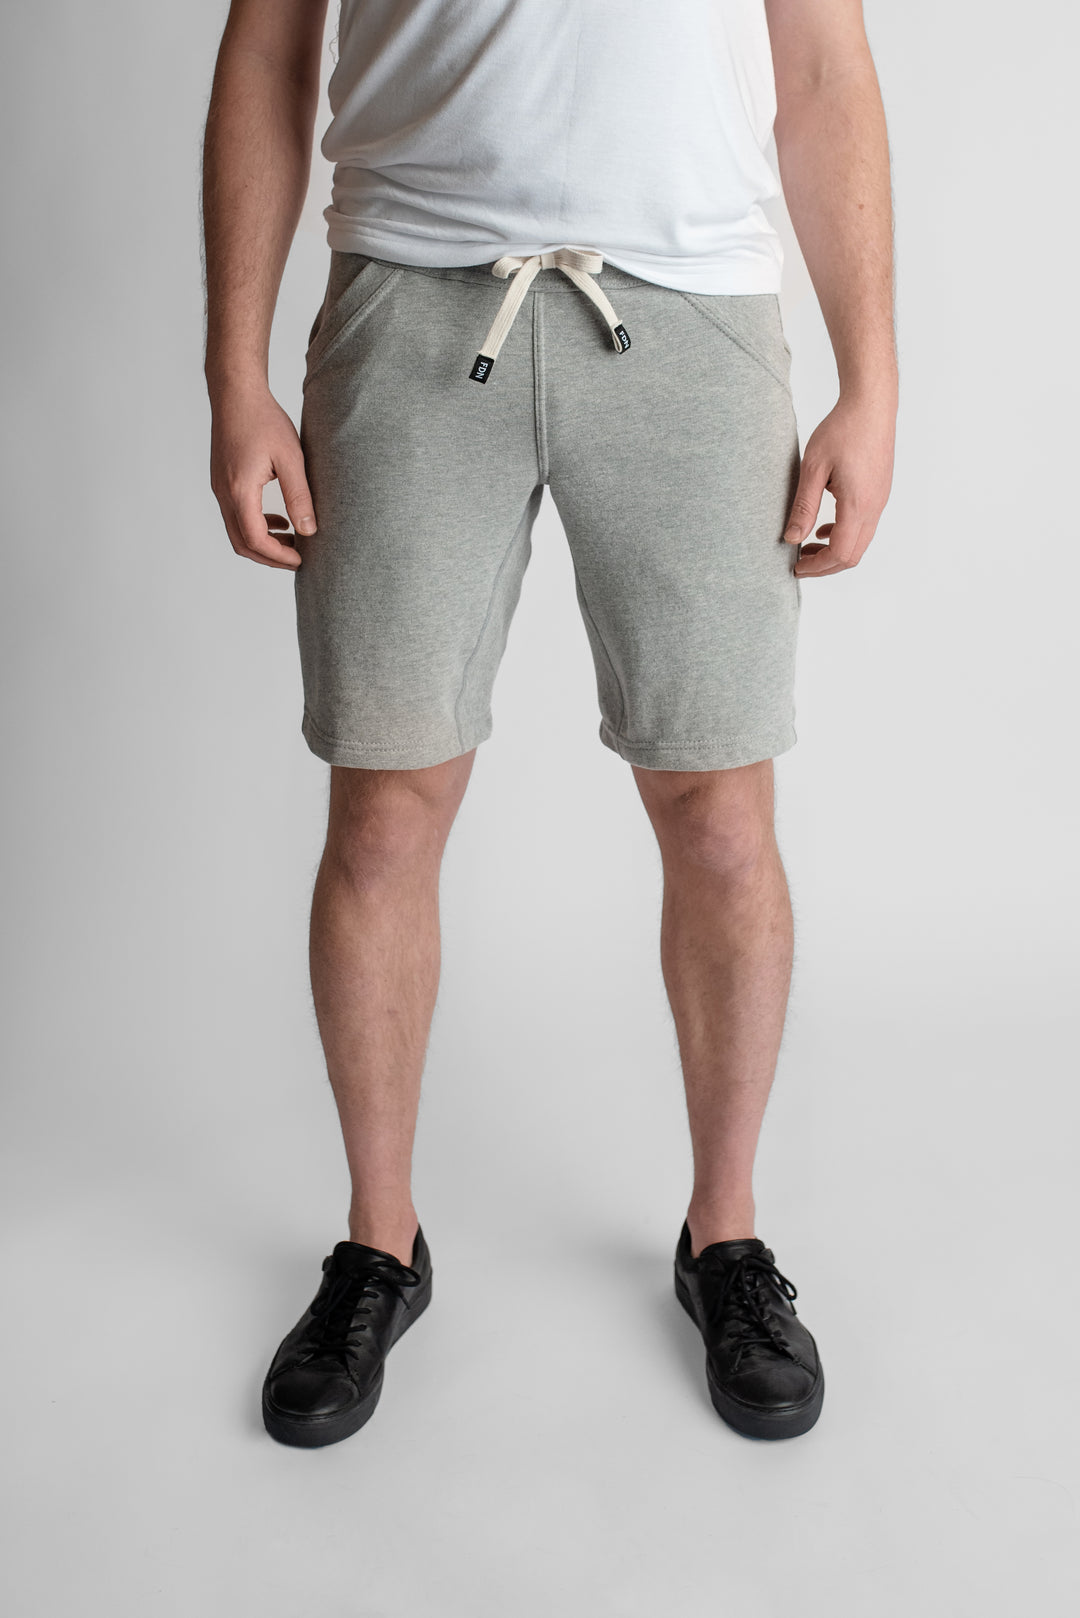 Light Grey Sweat Shorts Sustainable Mens Womens Comfortable Luxury Sueded Napped Soft French Felted Cotton Terry Fabriqué au Canada. Angled front pockets with side cellphone pockets and inner leg rib gusset. Cotton Drawcord clothing made in canada